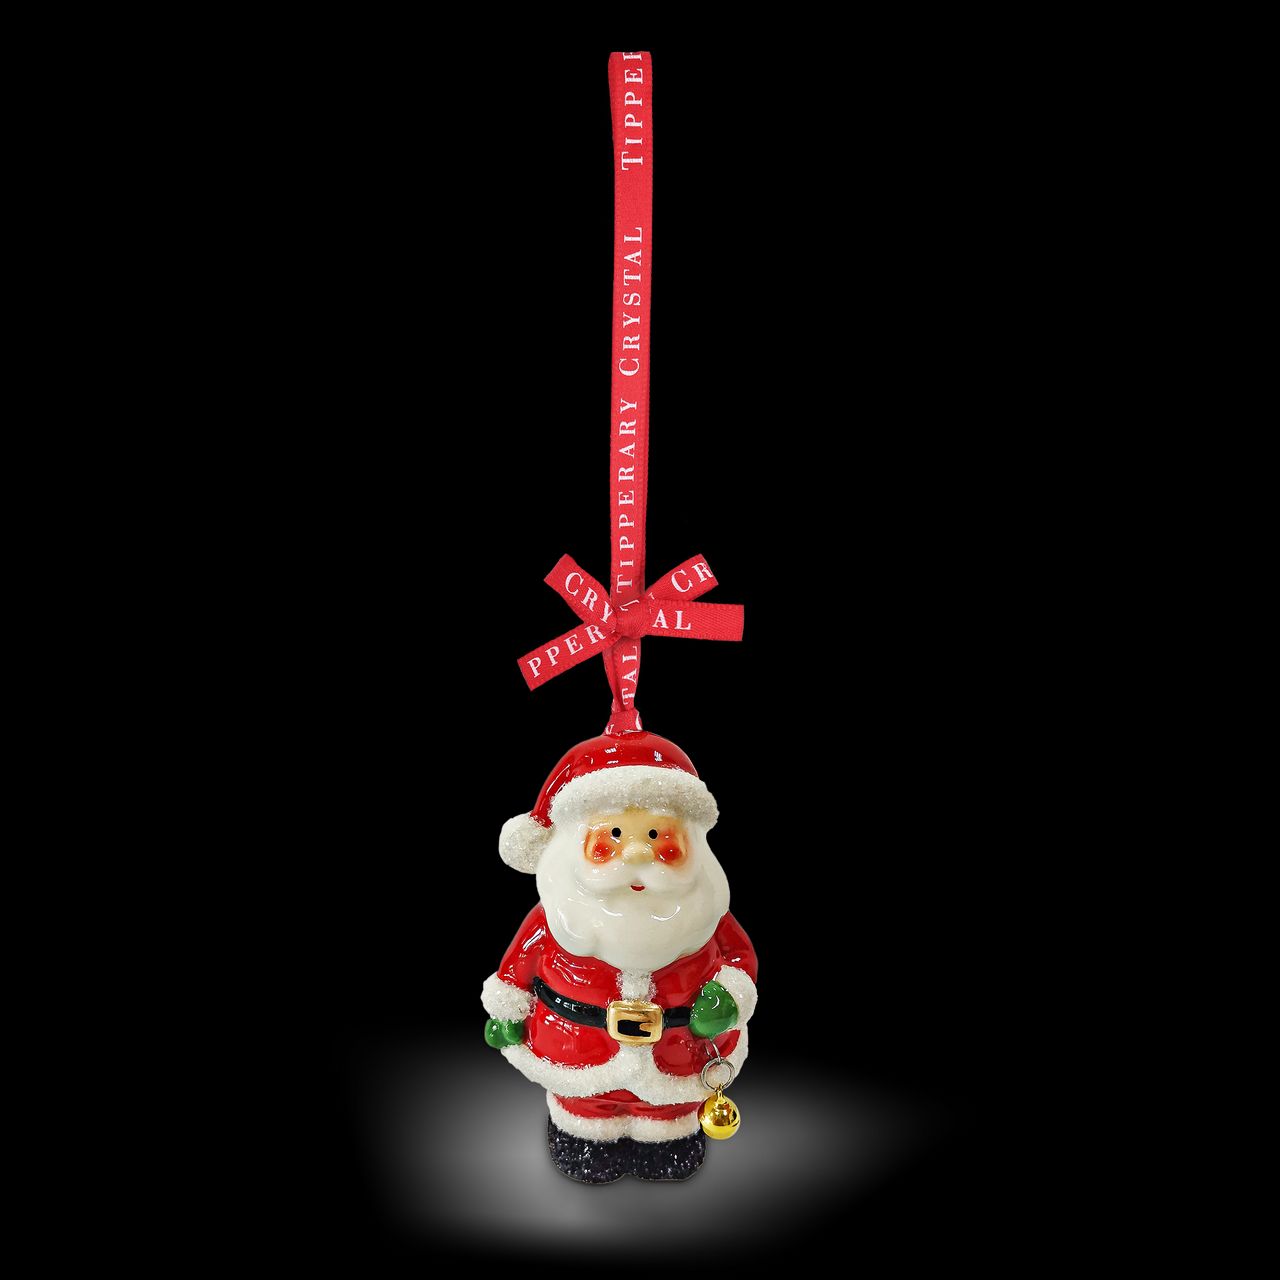 Porcelain Decoration - Santa Standing Christmas Ornament - NEW 2022  We just Love Christmas! The festive season, the giving of gifts, creating memories and being together with family and loved ones. Have lots of fun with our lovingly designed and created Christmas decorations, each one has a magic sparkle of elf dust!